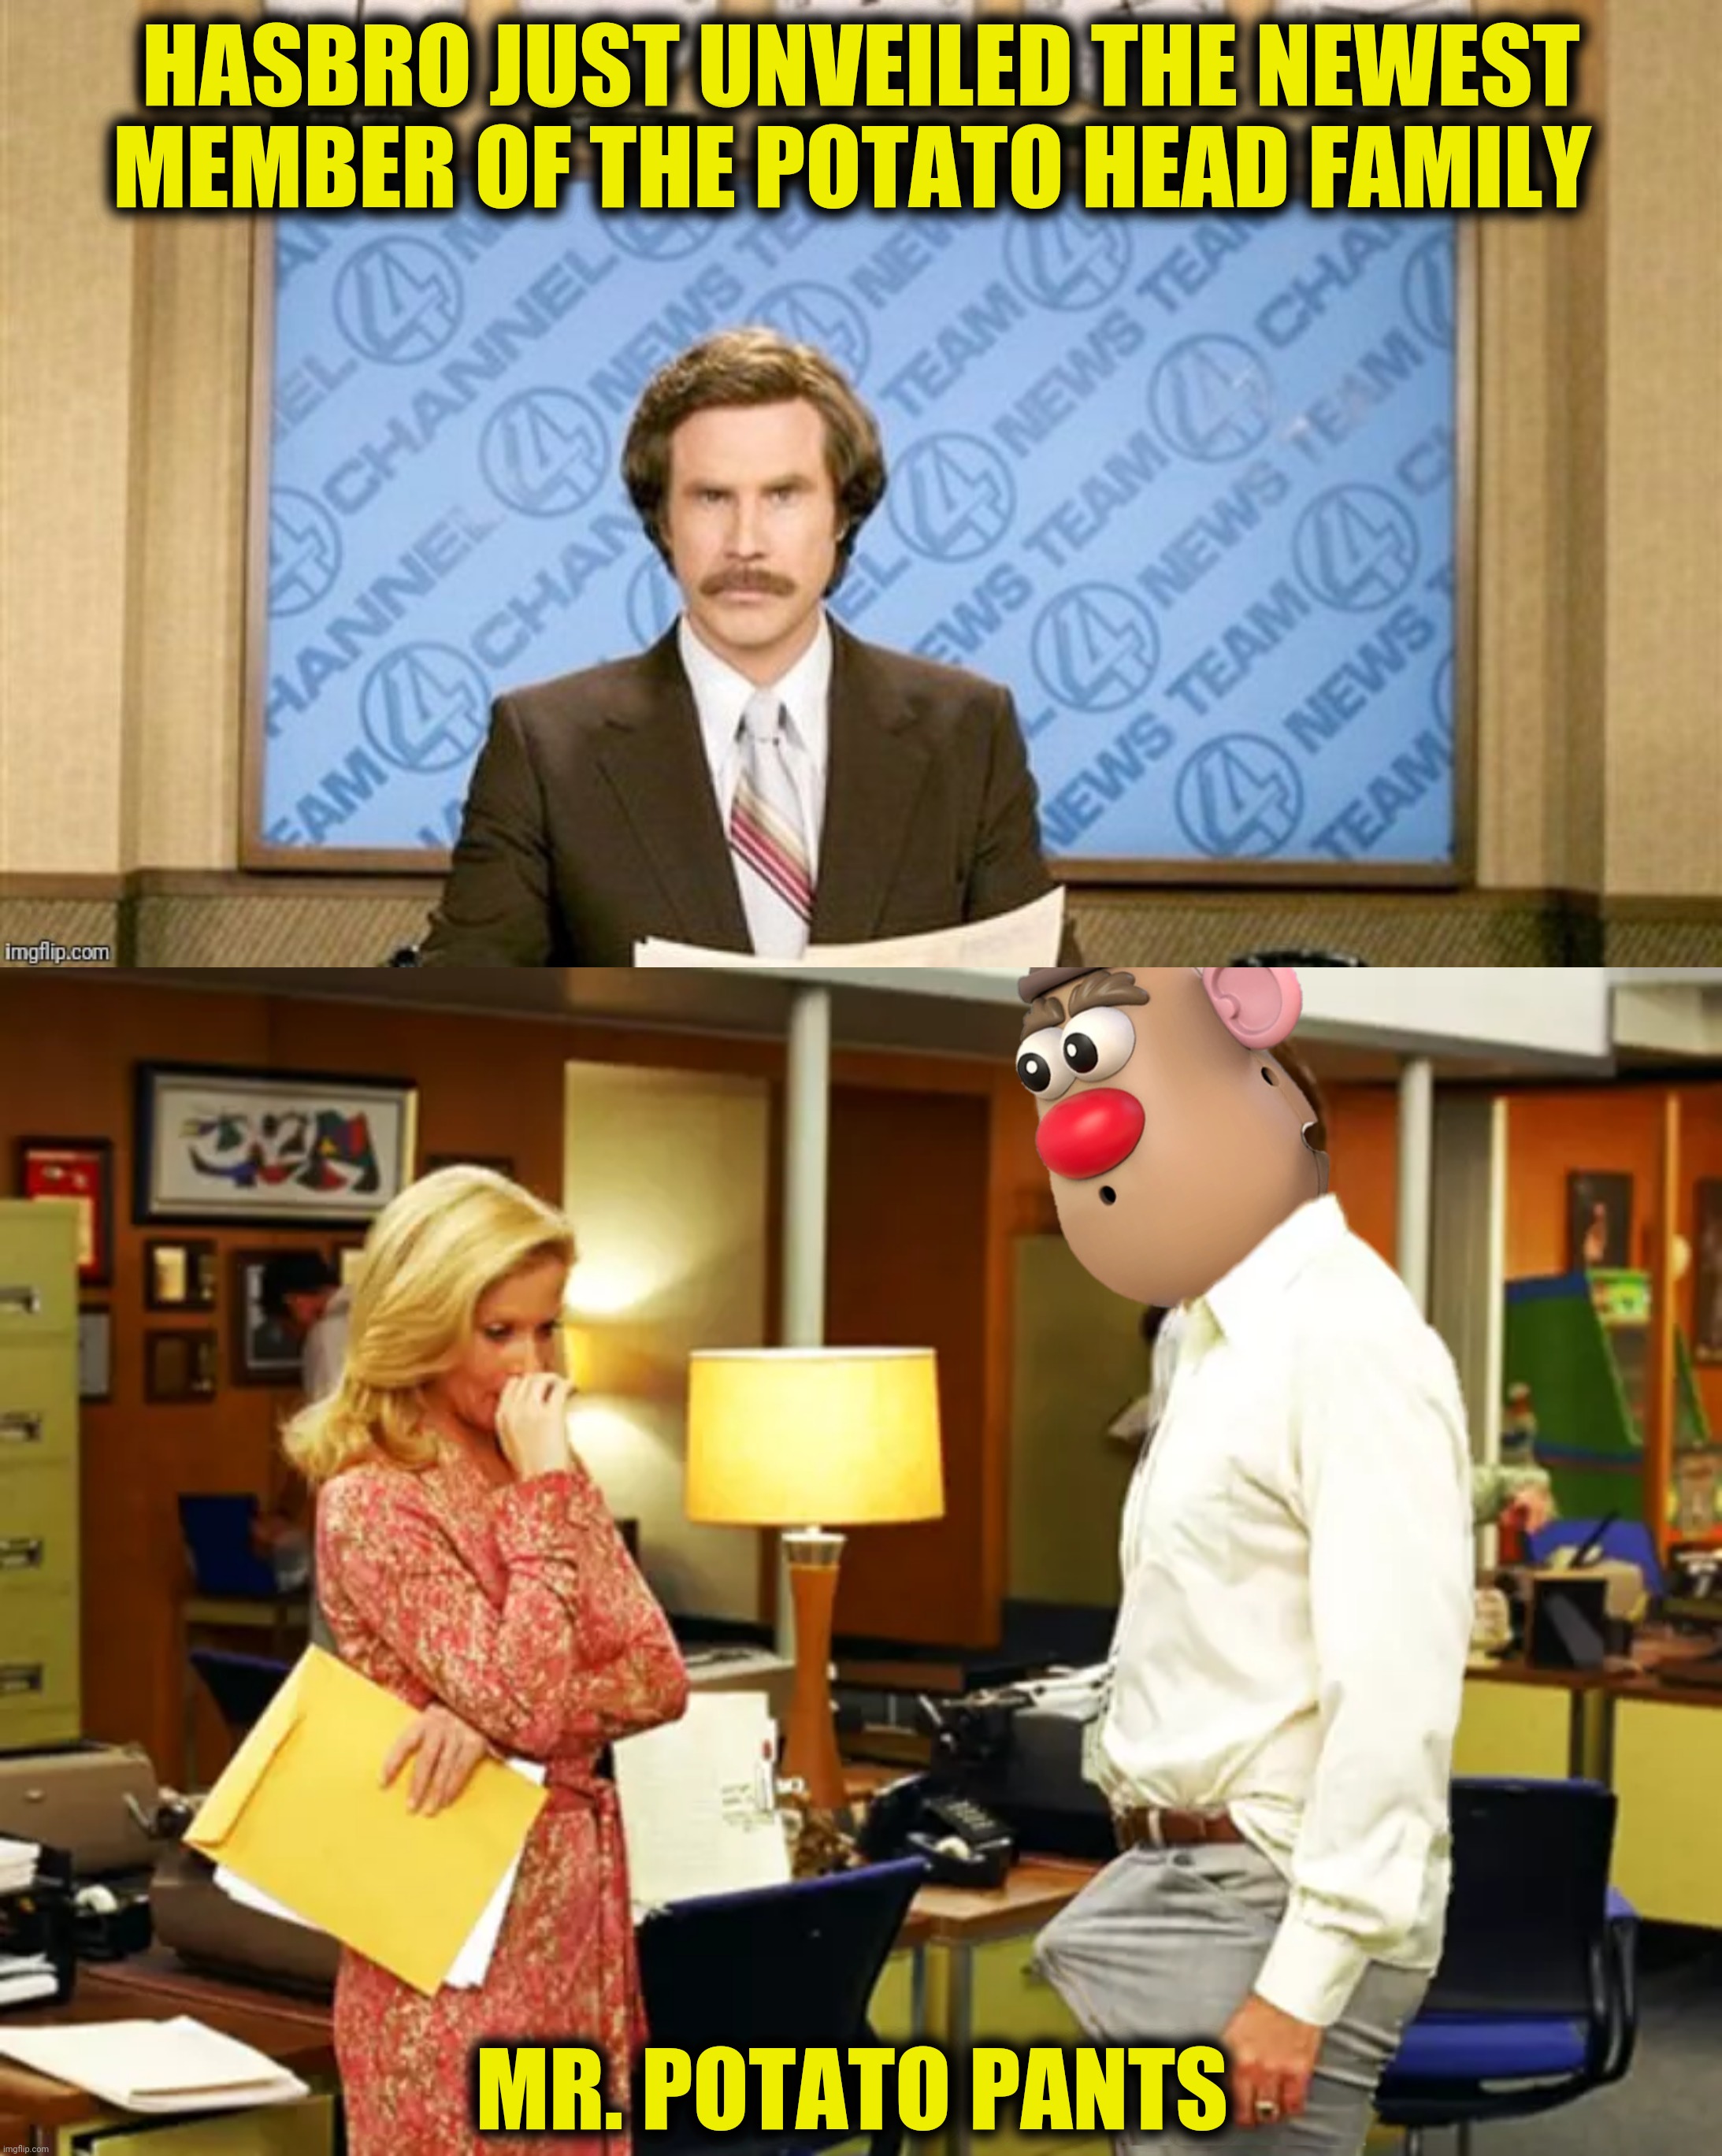 Bad Photoshop Sunday presents:  Keeping the "Bro" in Hasbro | HASBRO JUST UNVEILED THE NEWEST MEMBER OF THE POTATO HEAD FAMILY; MR. POTATO PANTS | image tagged in bad photoshop sunday,ron burgundy,mr potato head,mr potato pants | made w/ Imgflip meme maker